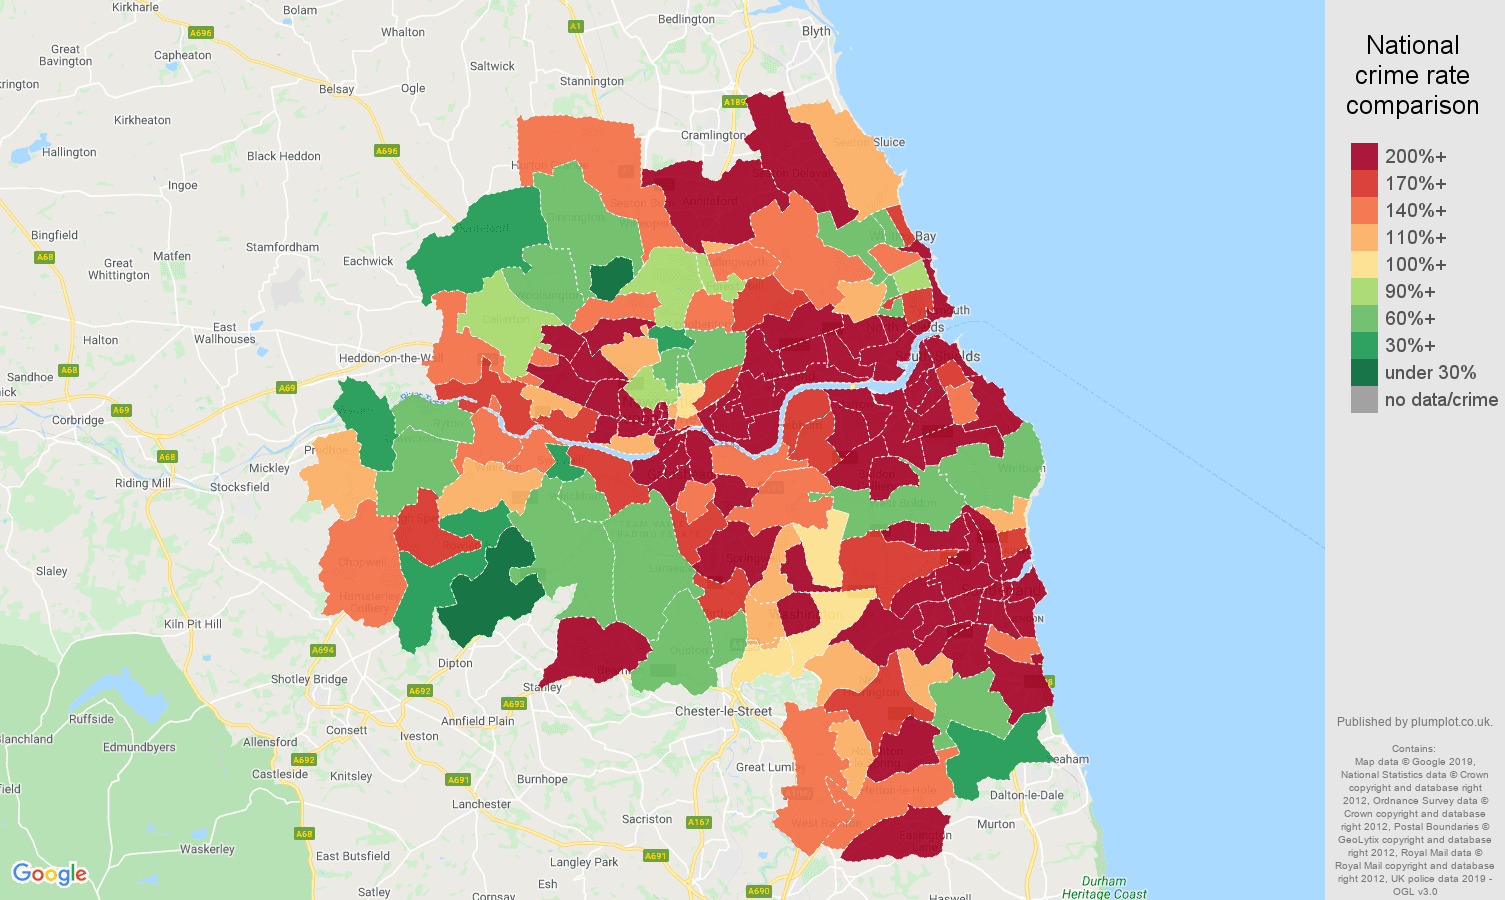 Tyne and Wear public order crime rate comparison map